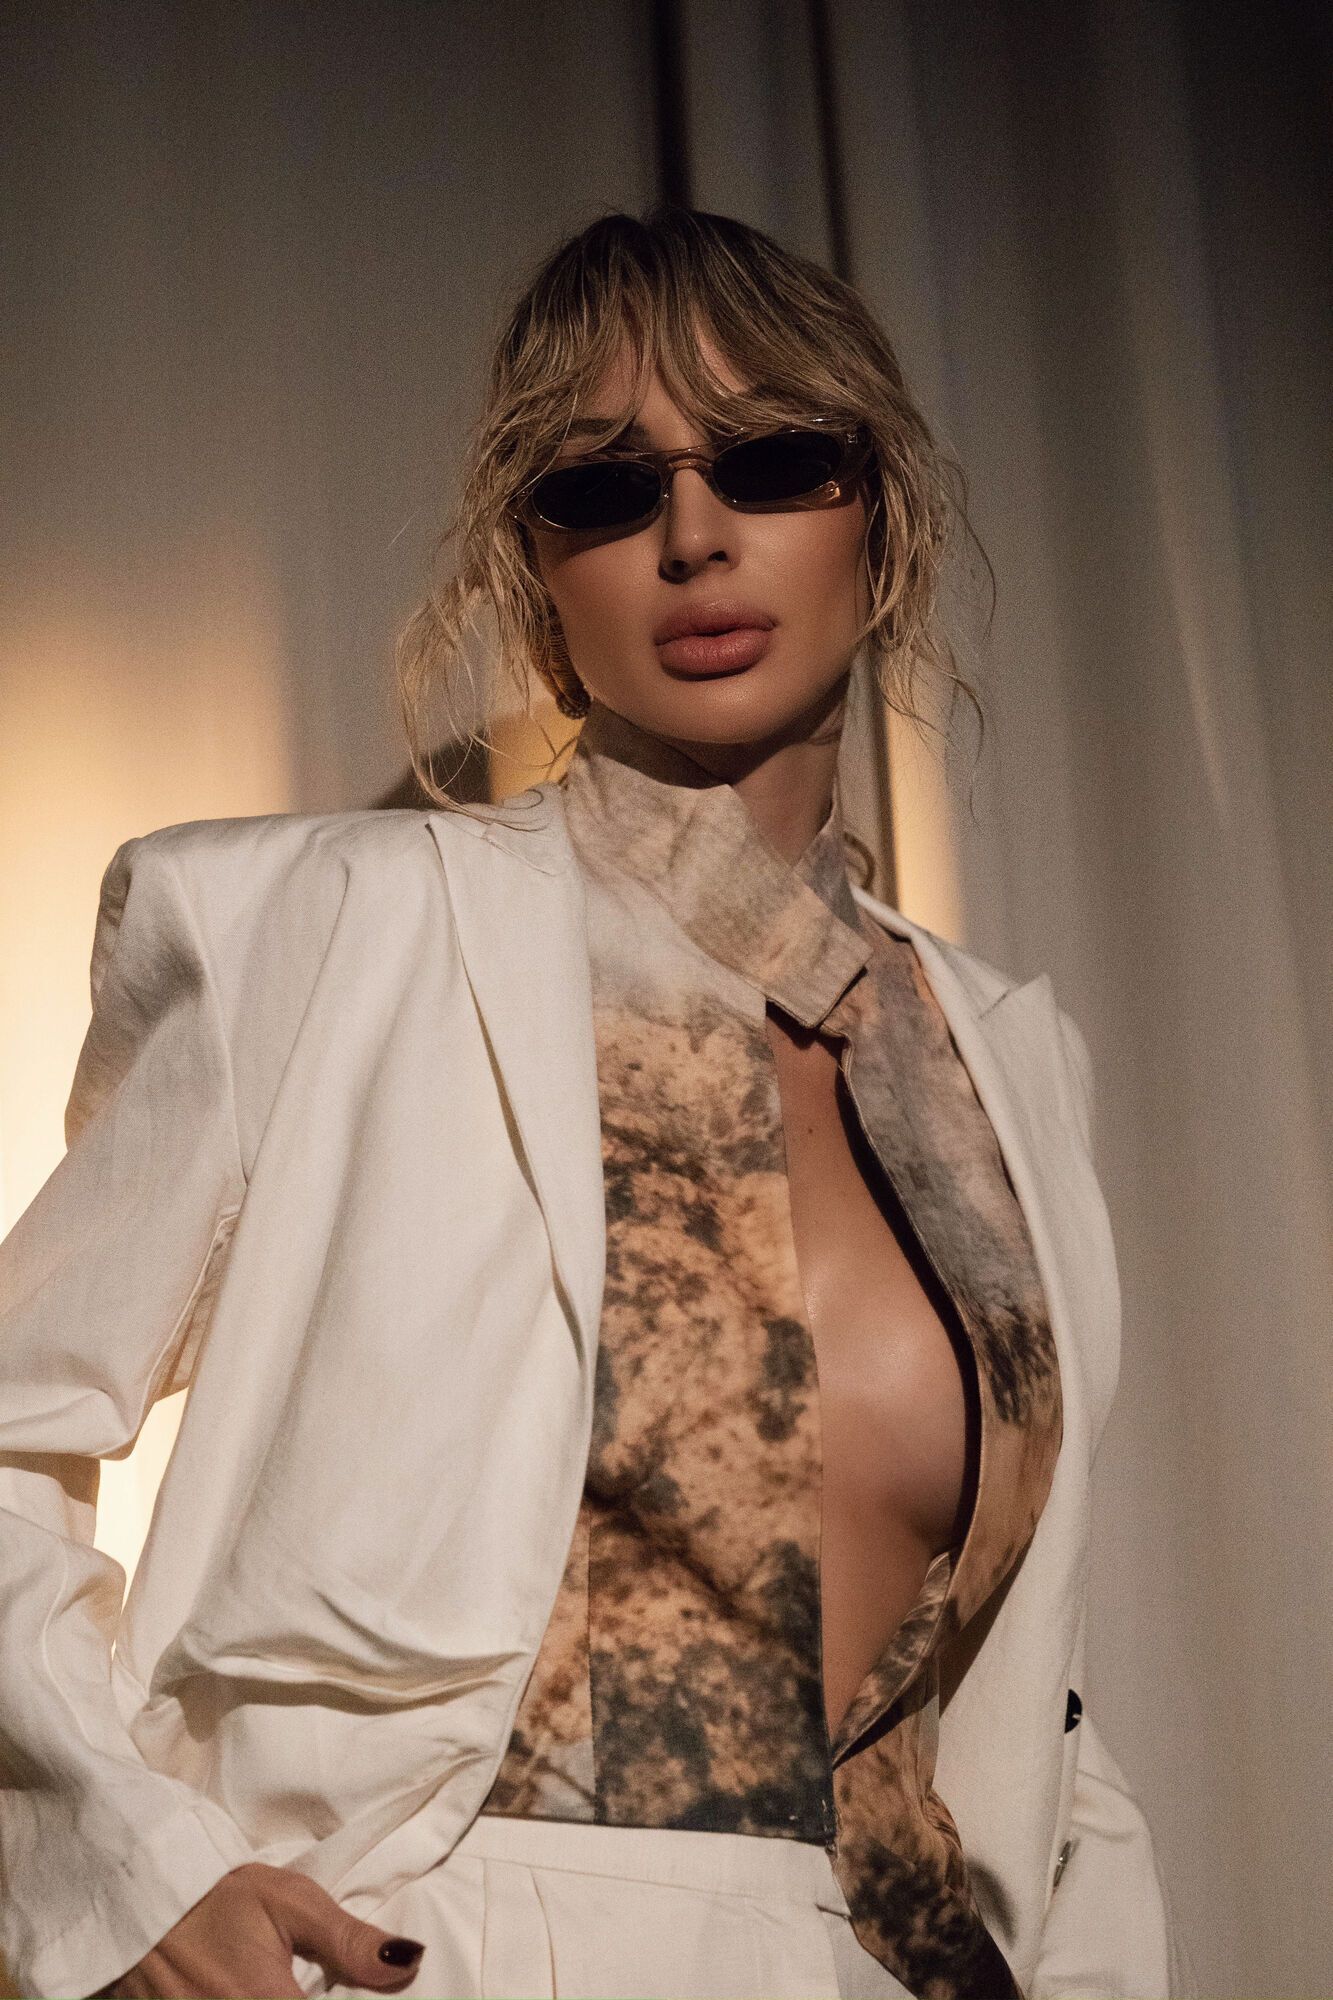 LOBODA released an English-language single for the first time